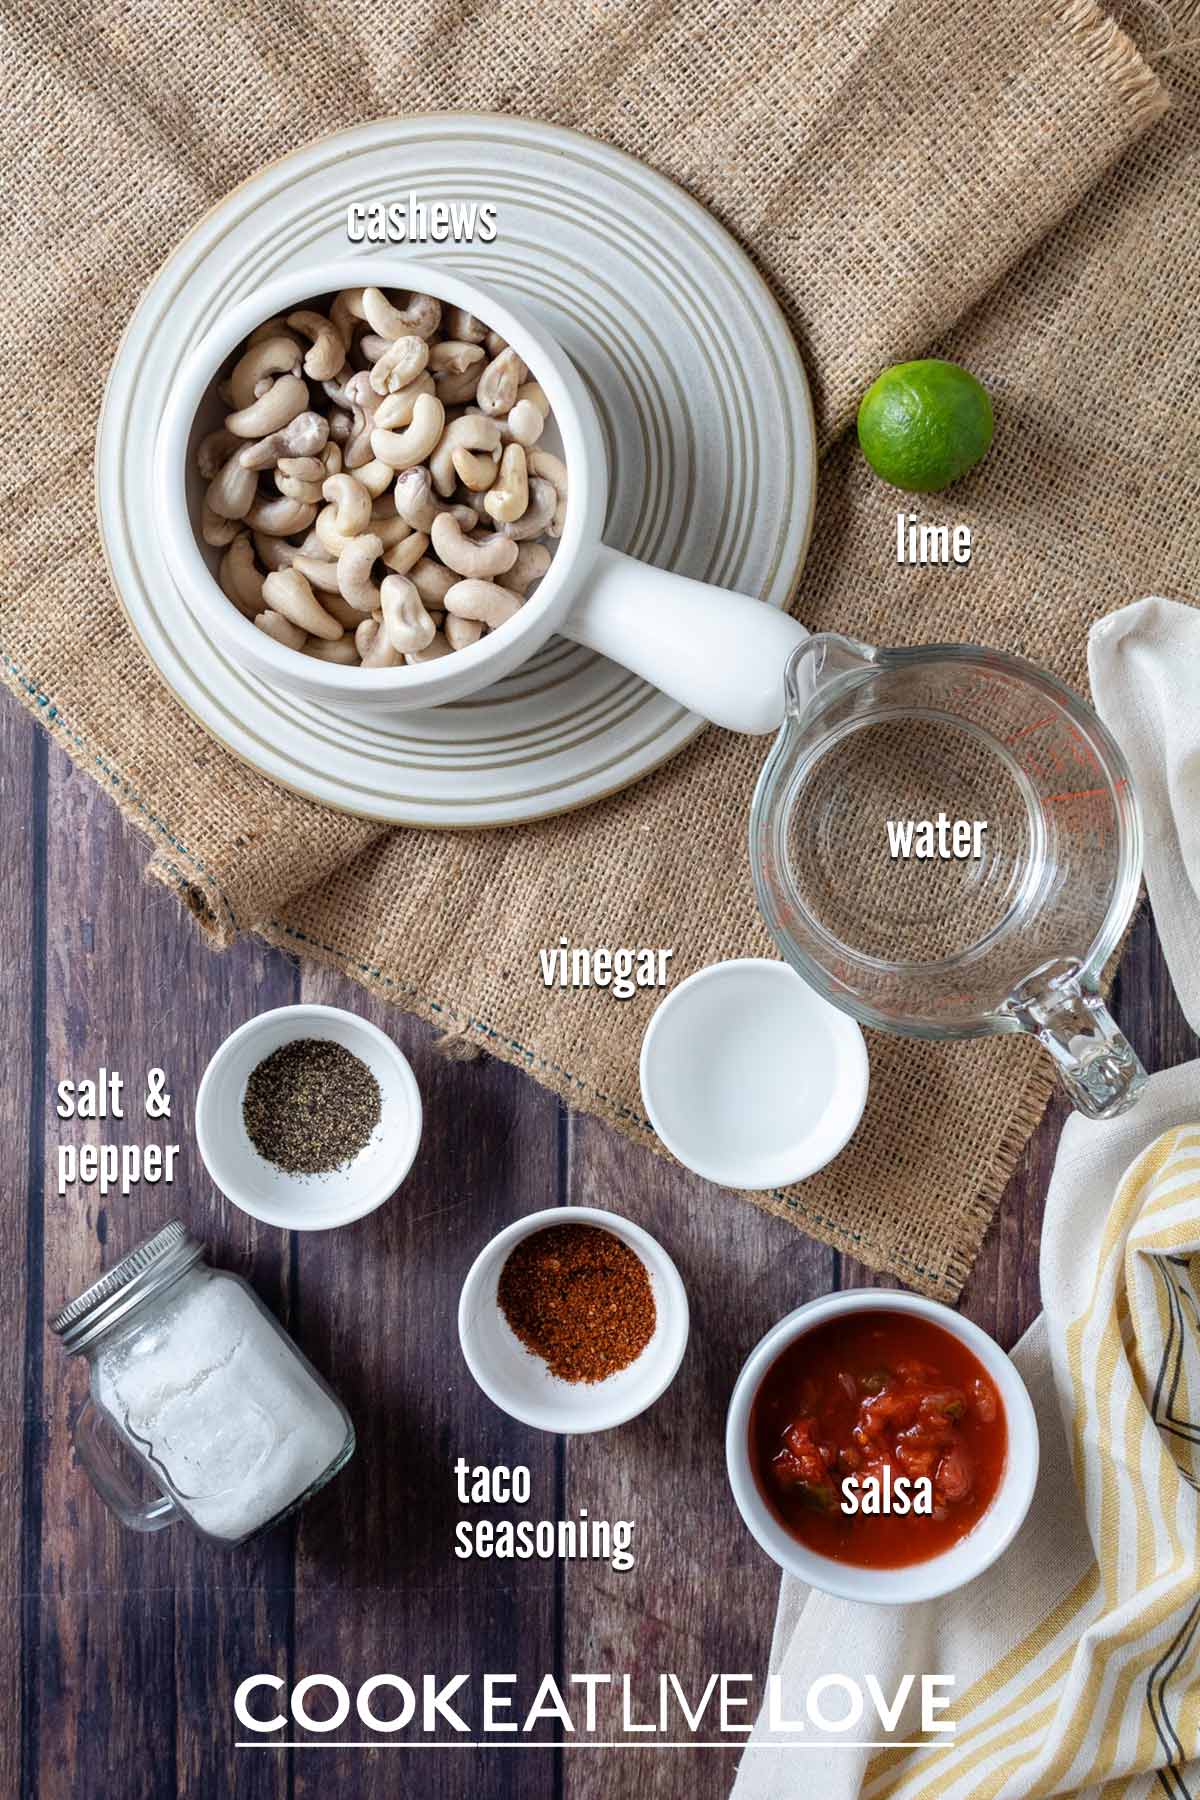 Ingredients to make the cashew taco salad dressing for a vegan taco salad.